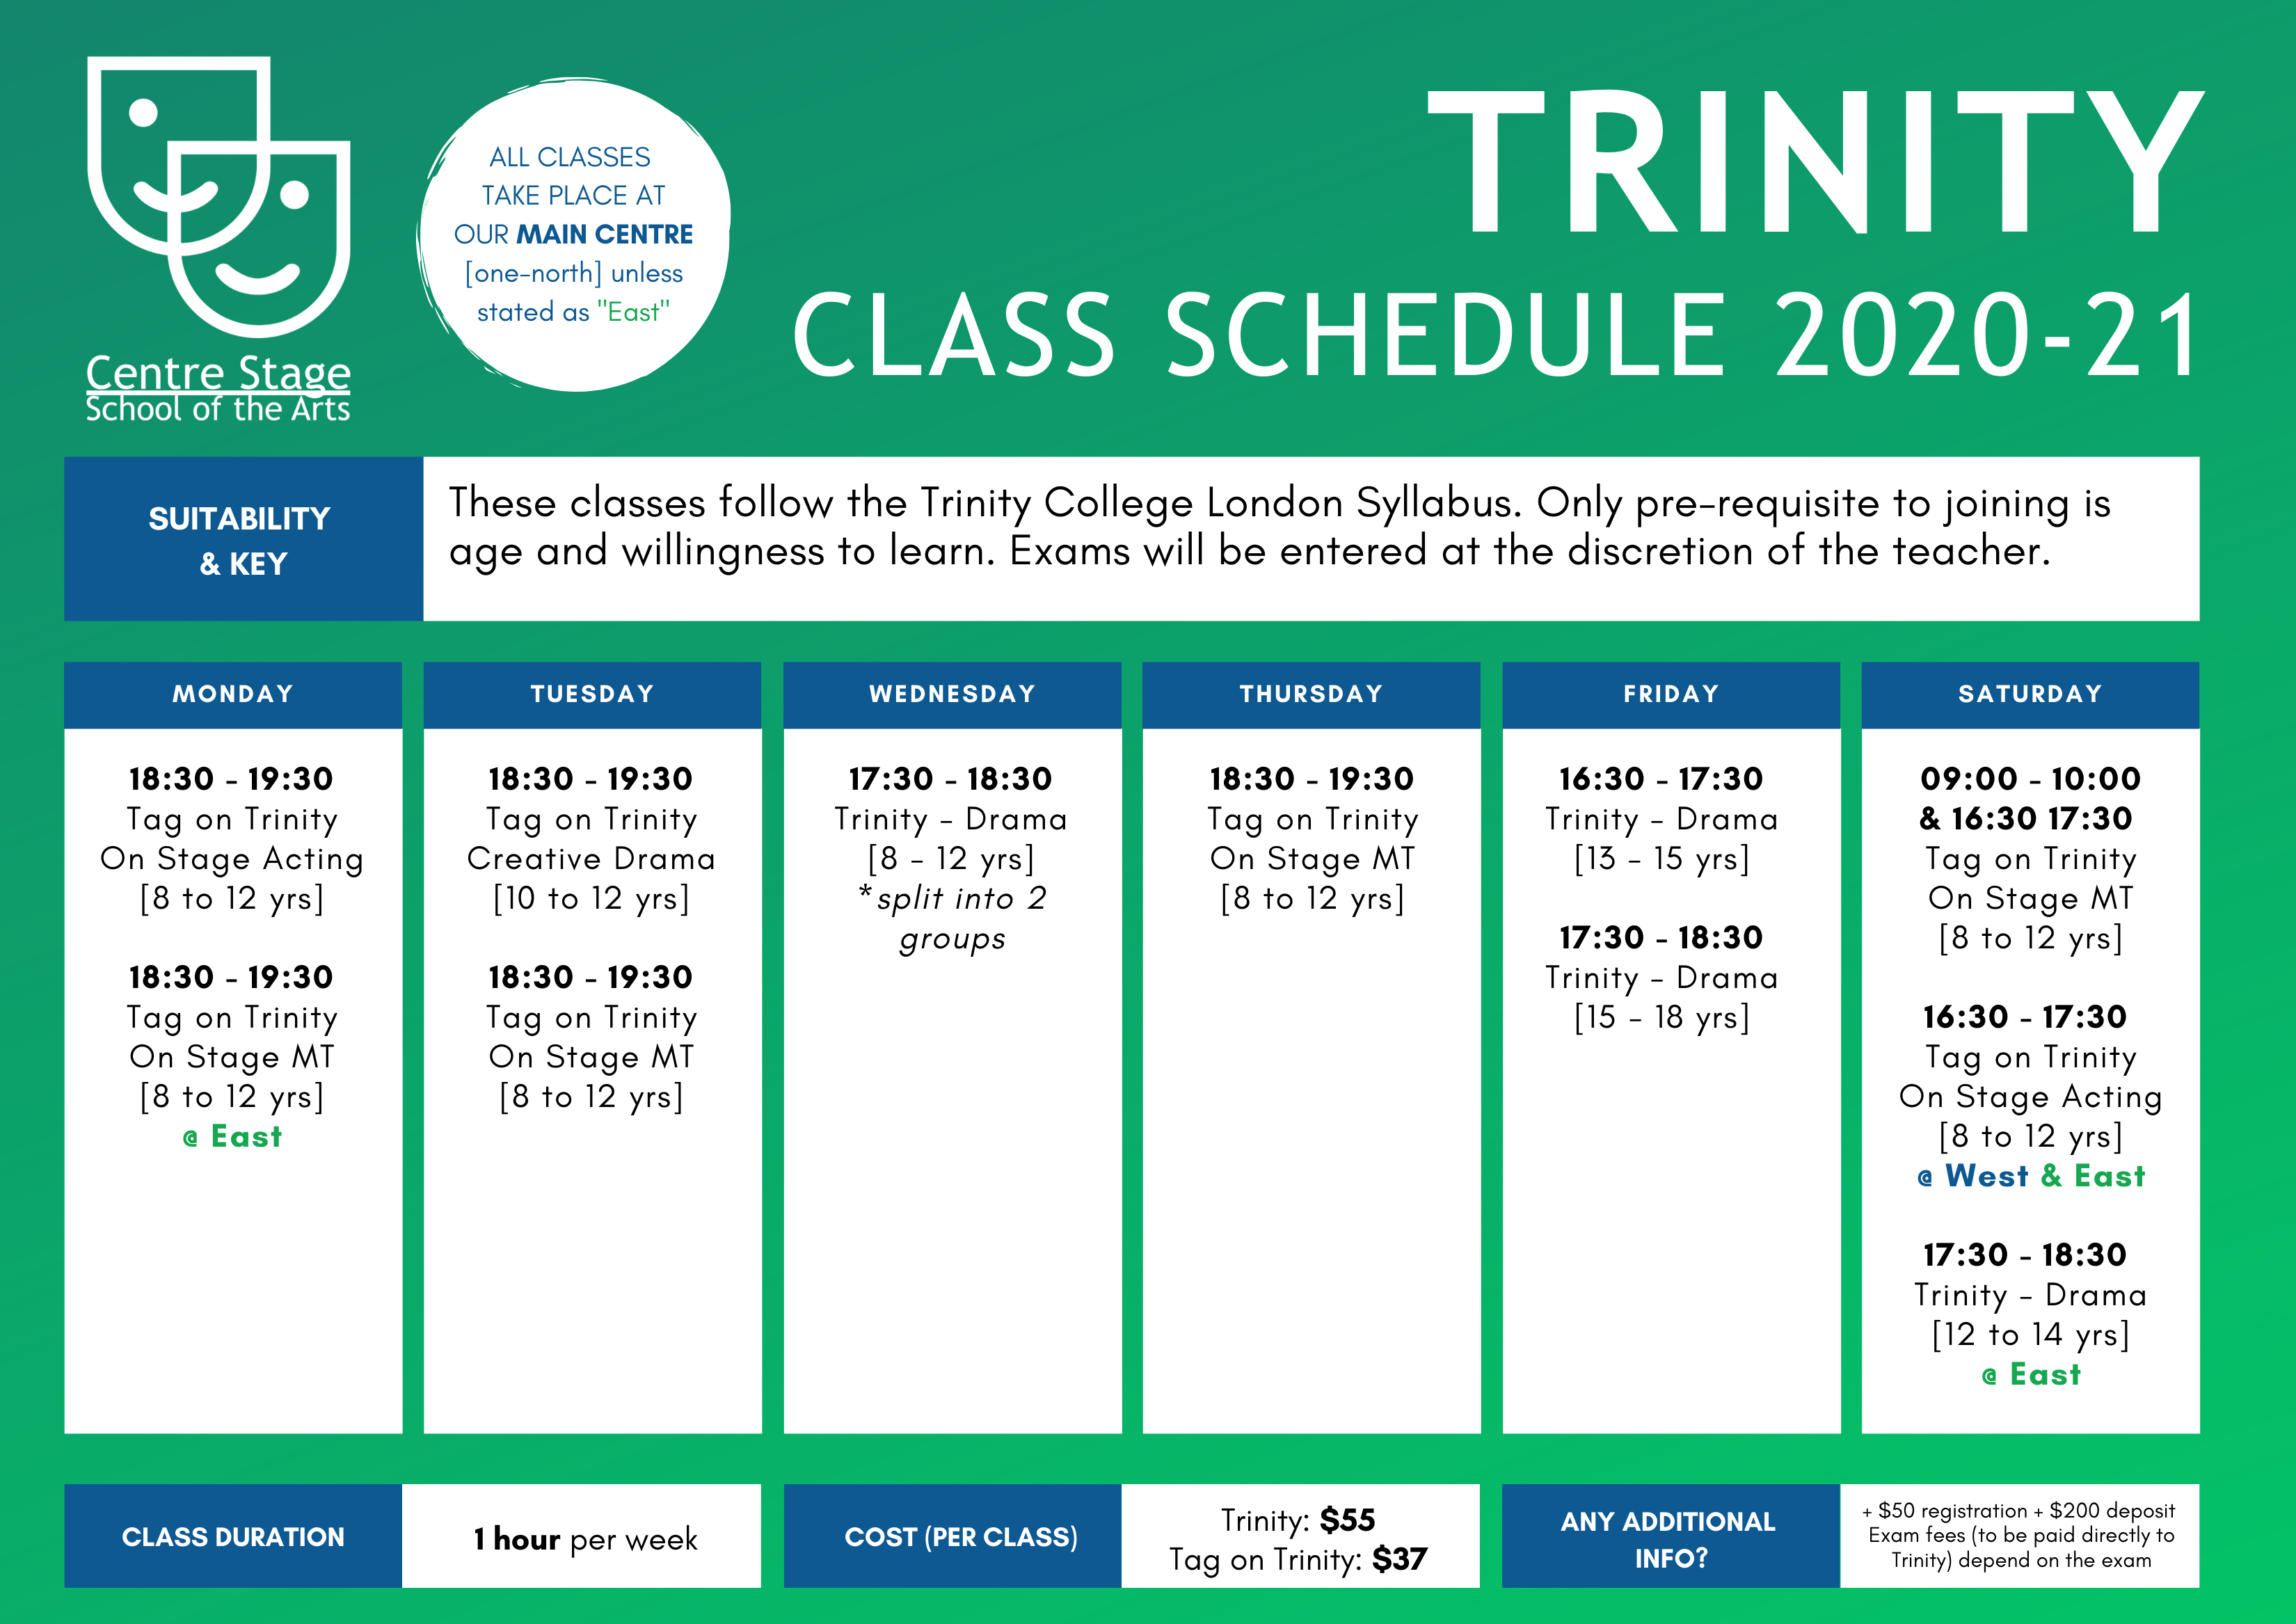 trinity-class-schedules-2020-21-centre-stage